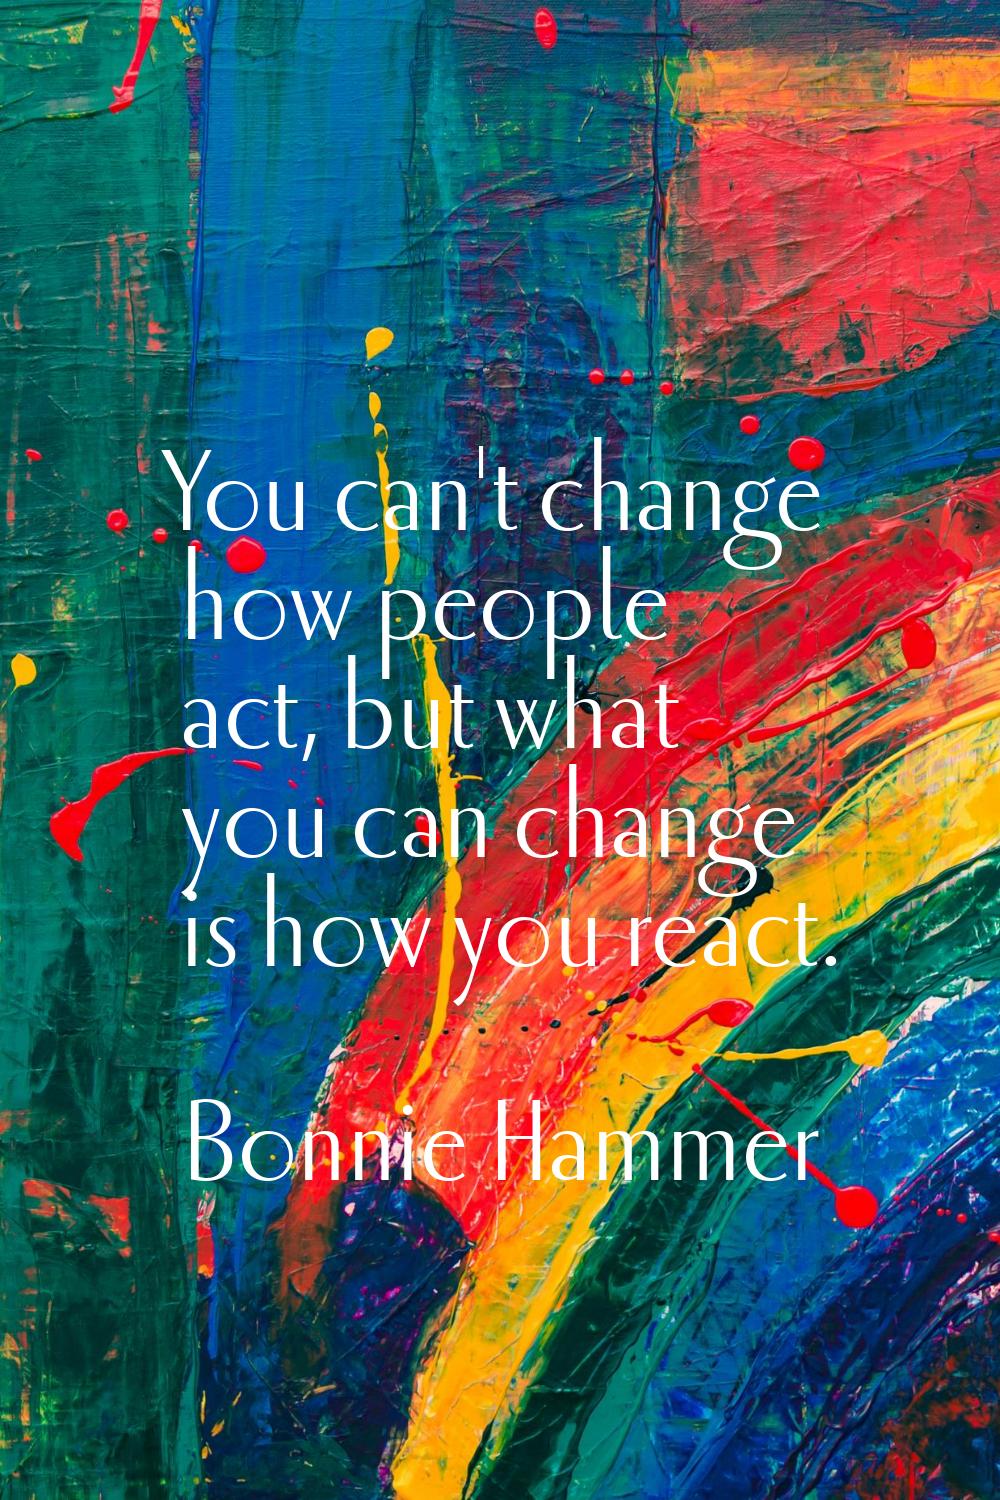 You can't change how people act, but what you can change is how you react.